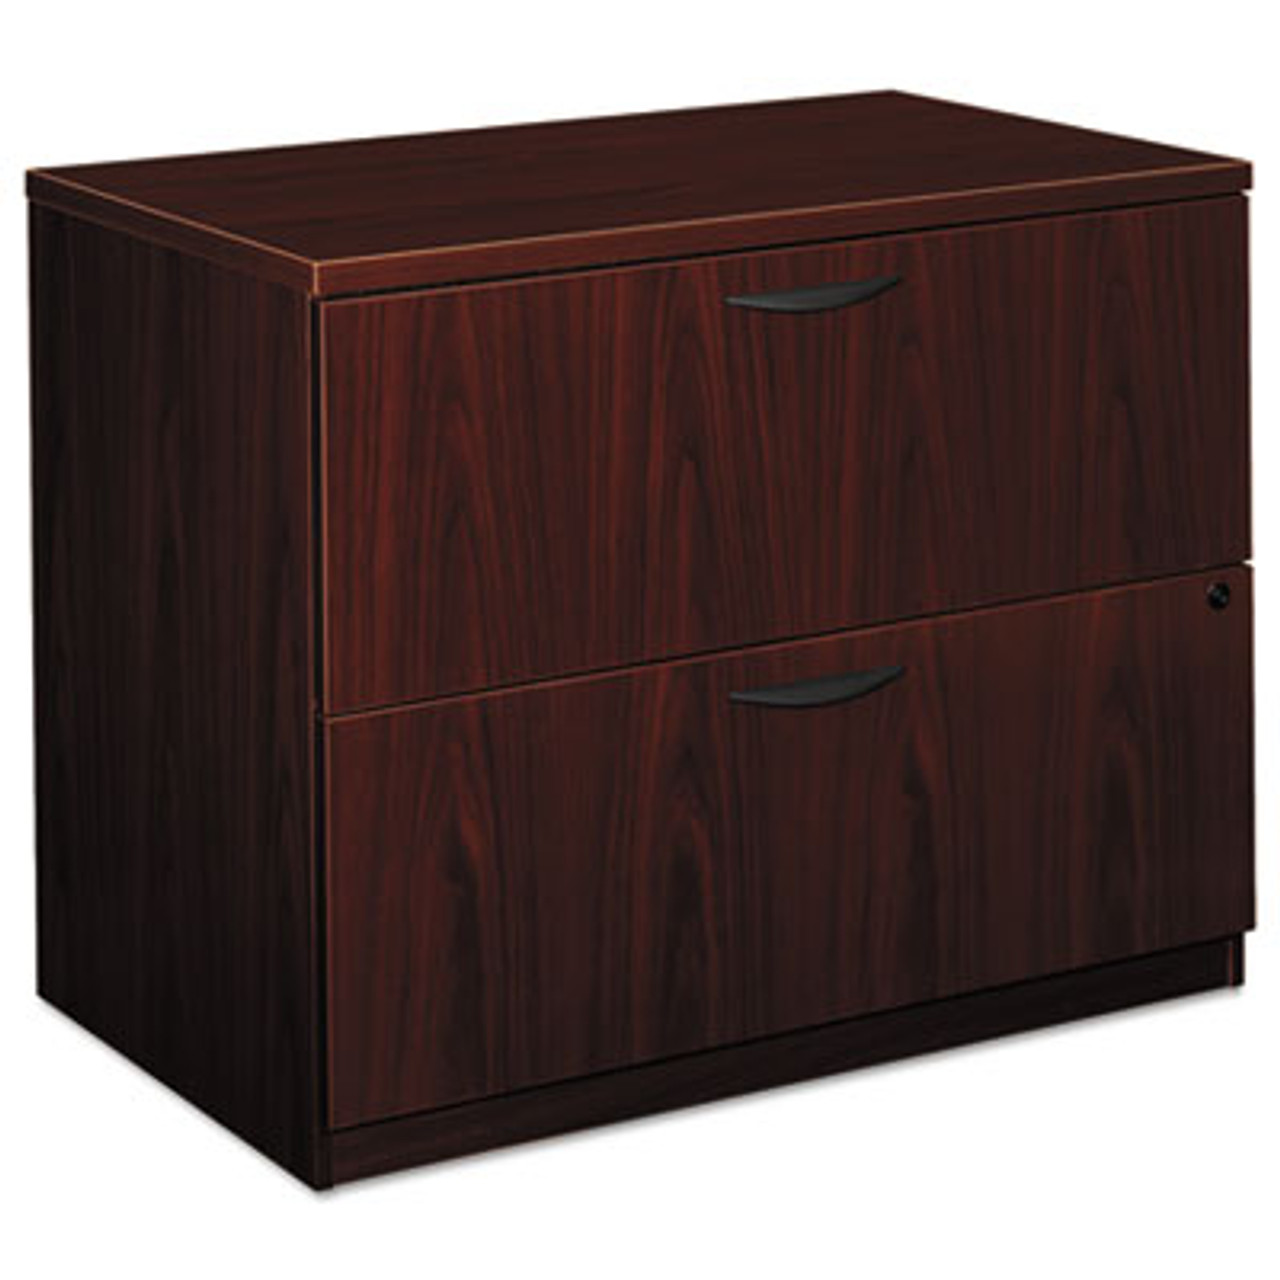 BL Laminate Two Drawer Lateral File, 35 1/2w x 22d x 29h, Mahogany